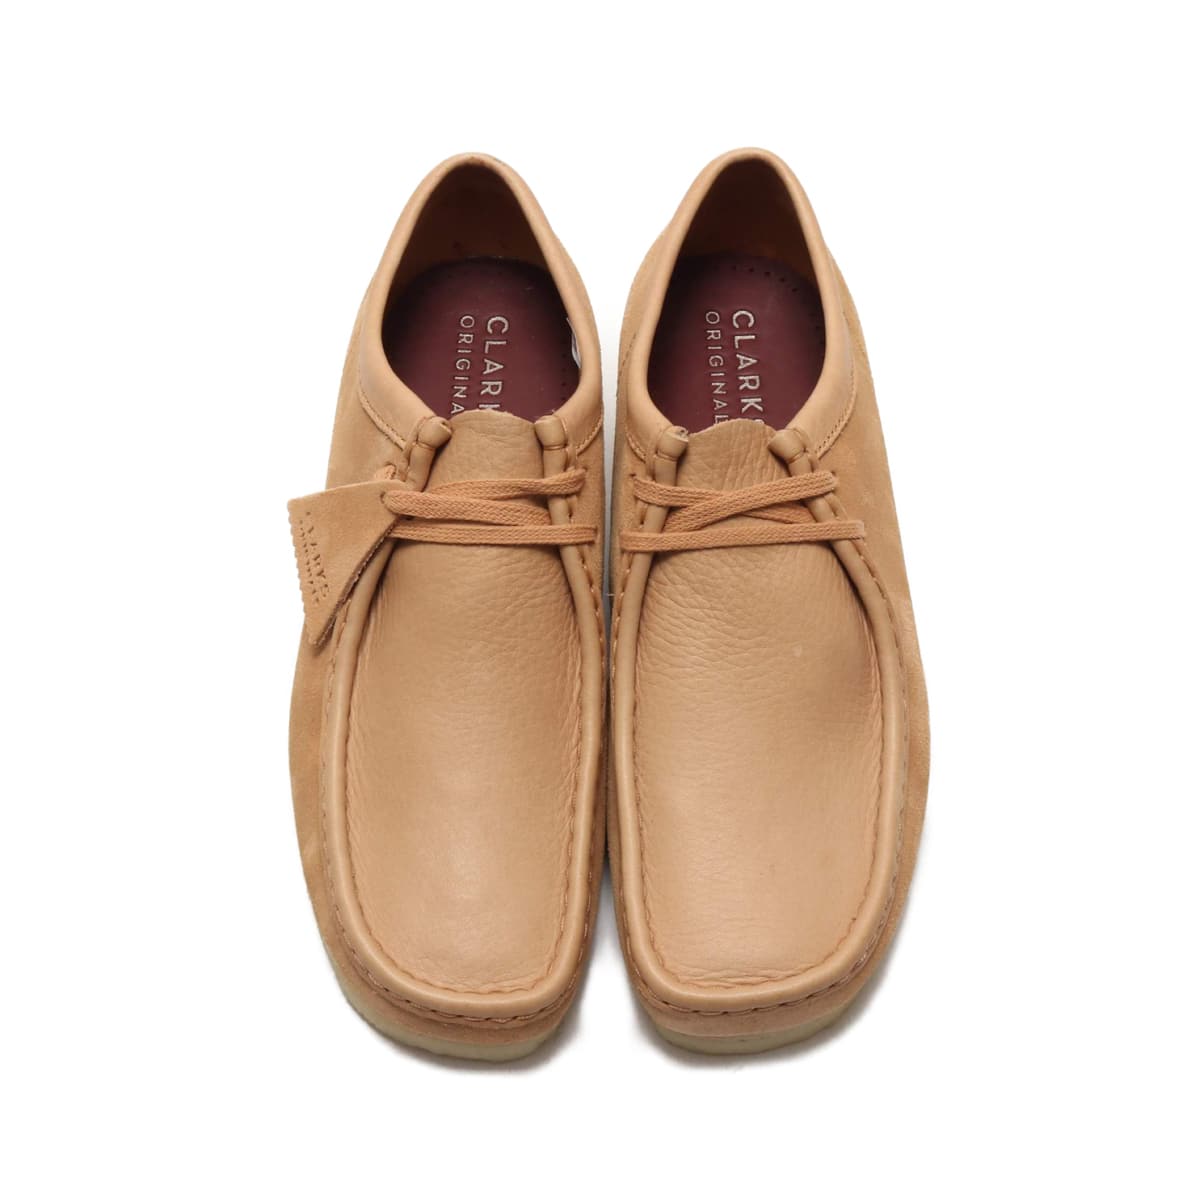 clarks wallabee ライトピンク 23㎝ - モカシン